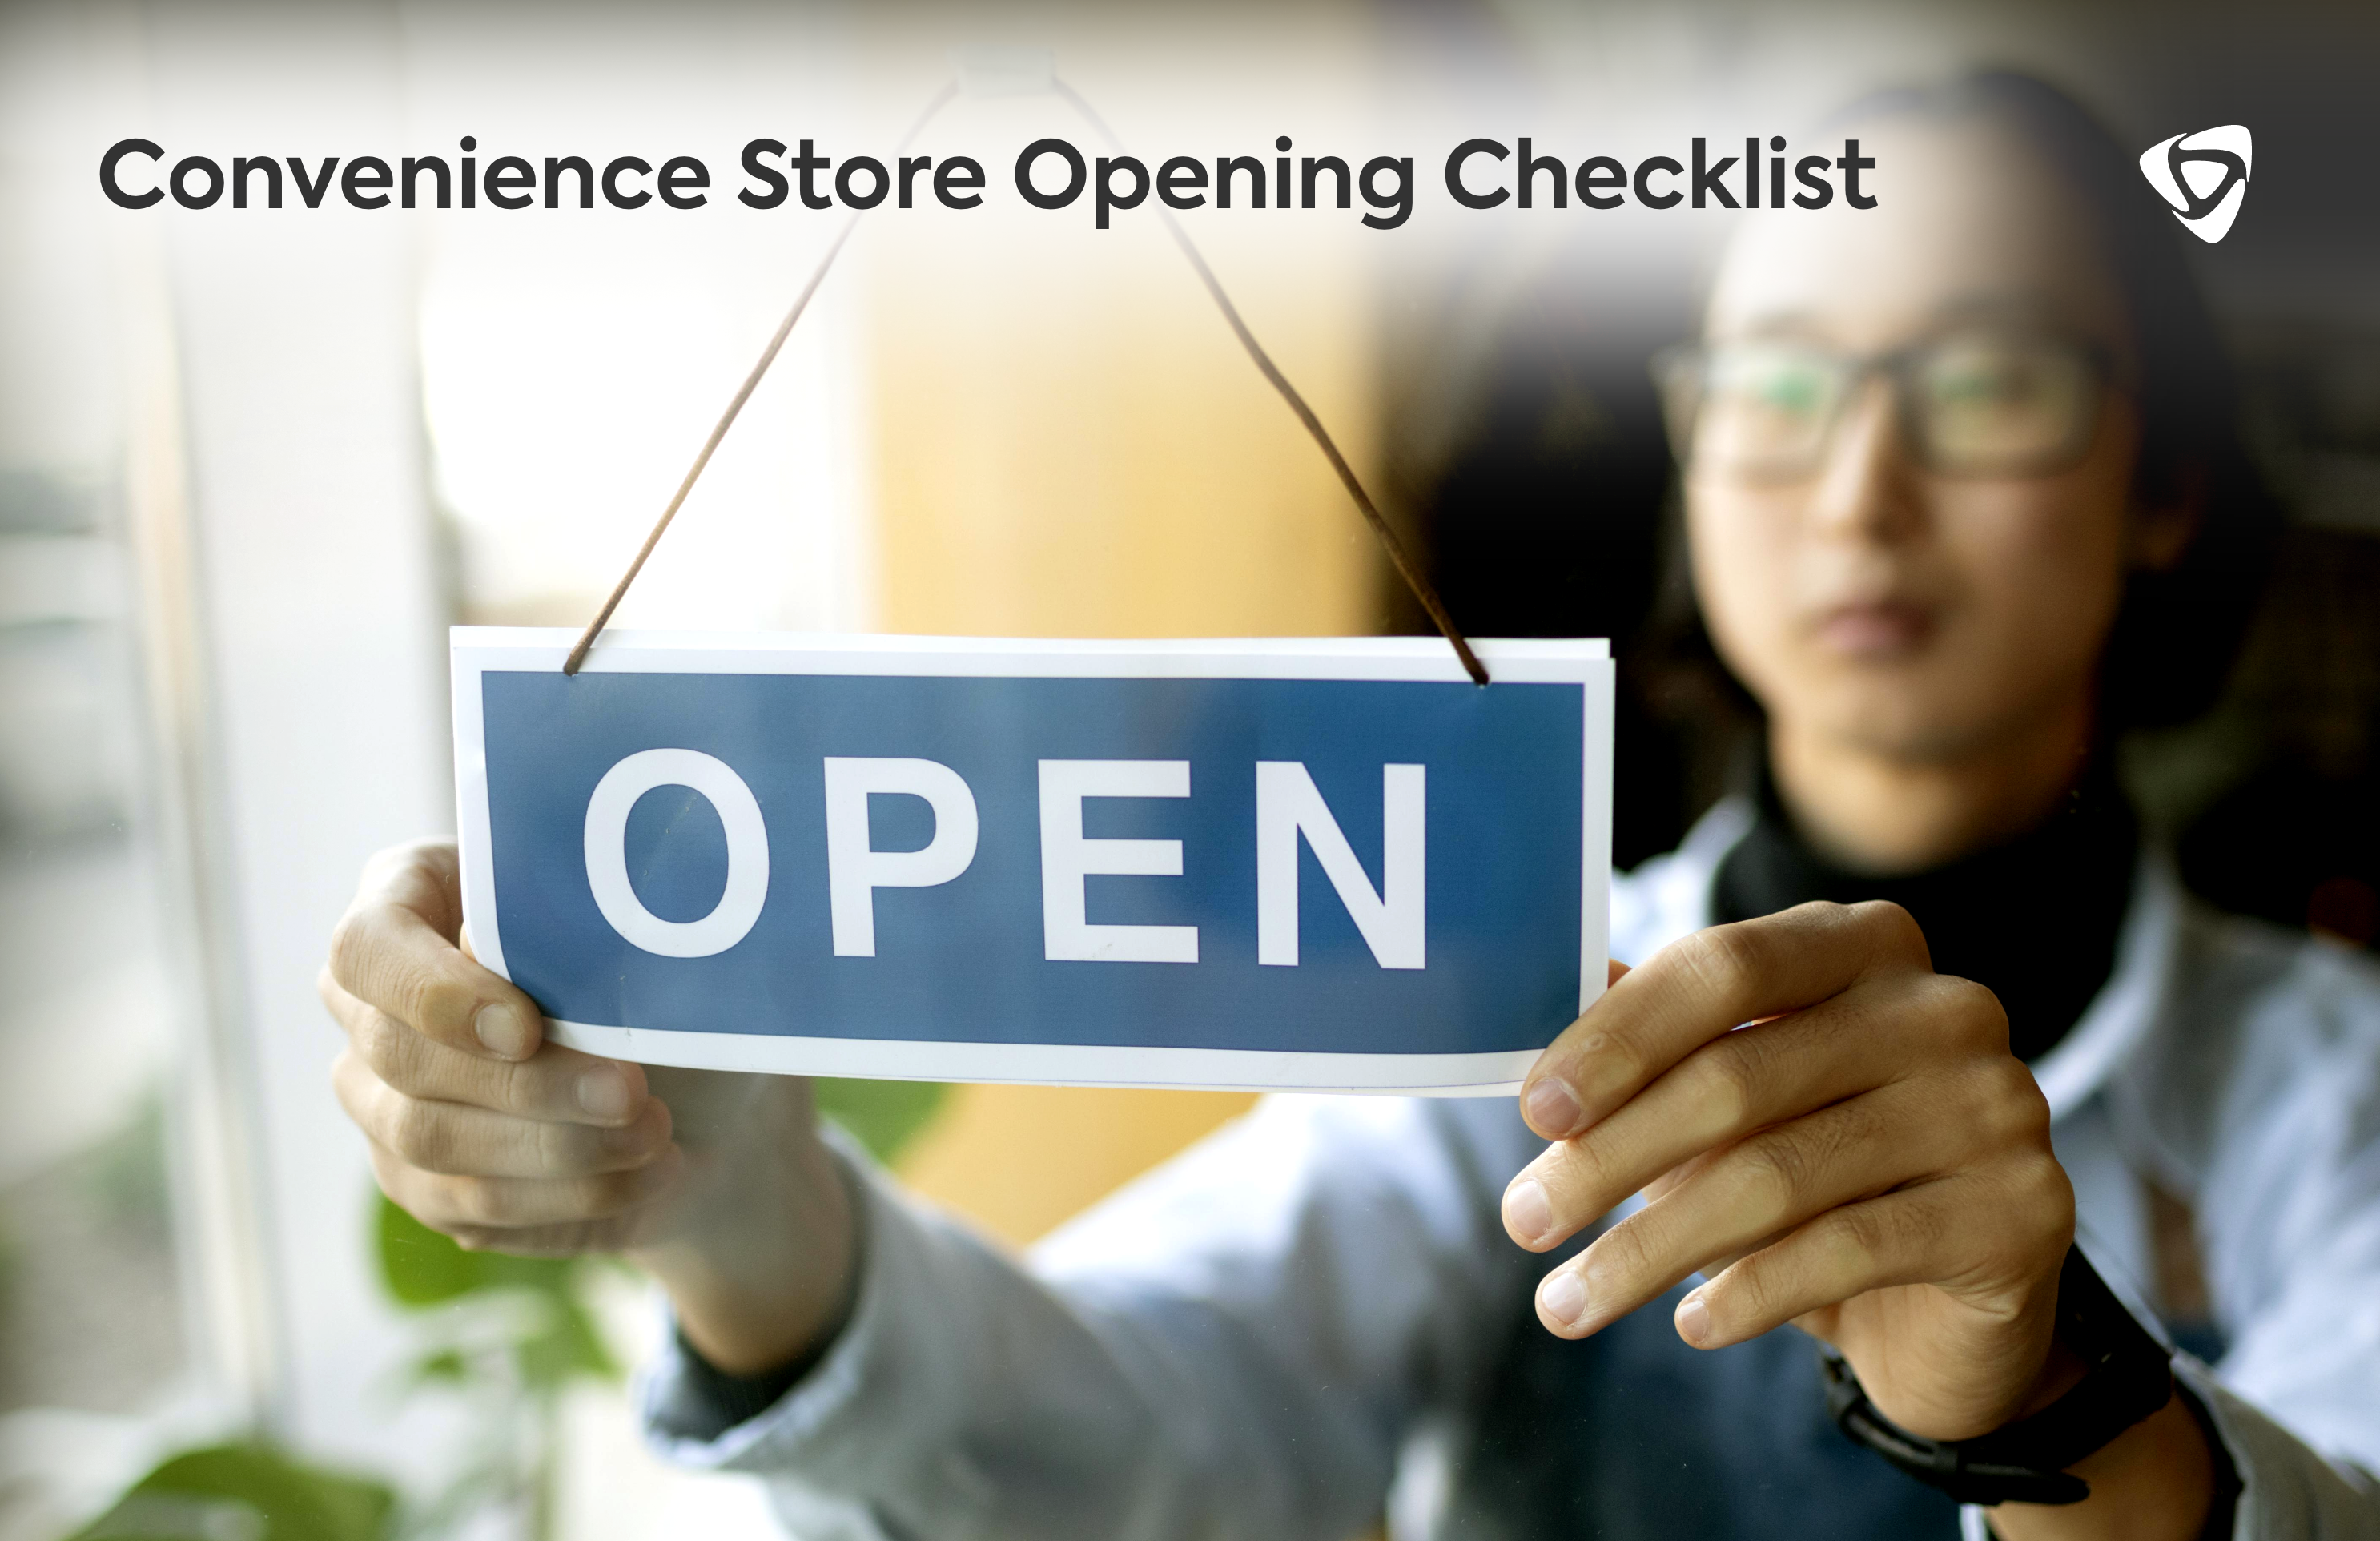 Convenience Store Opening Checklist